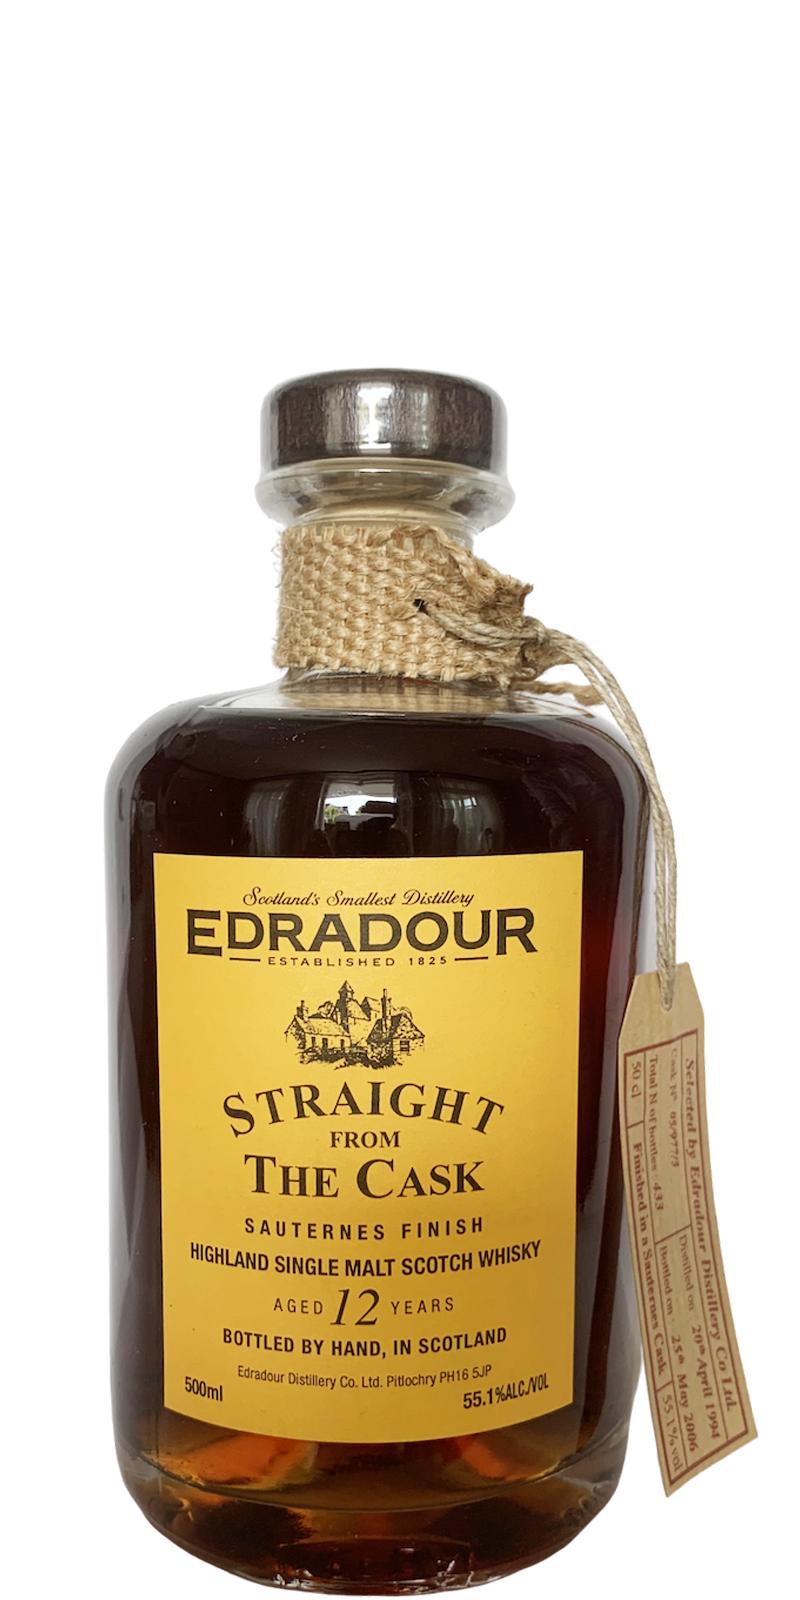 Edradour 1994 Straight From The Cask Sauternes Finish 05/977/3 55.1% 500ml